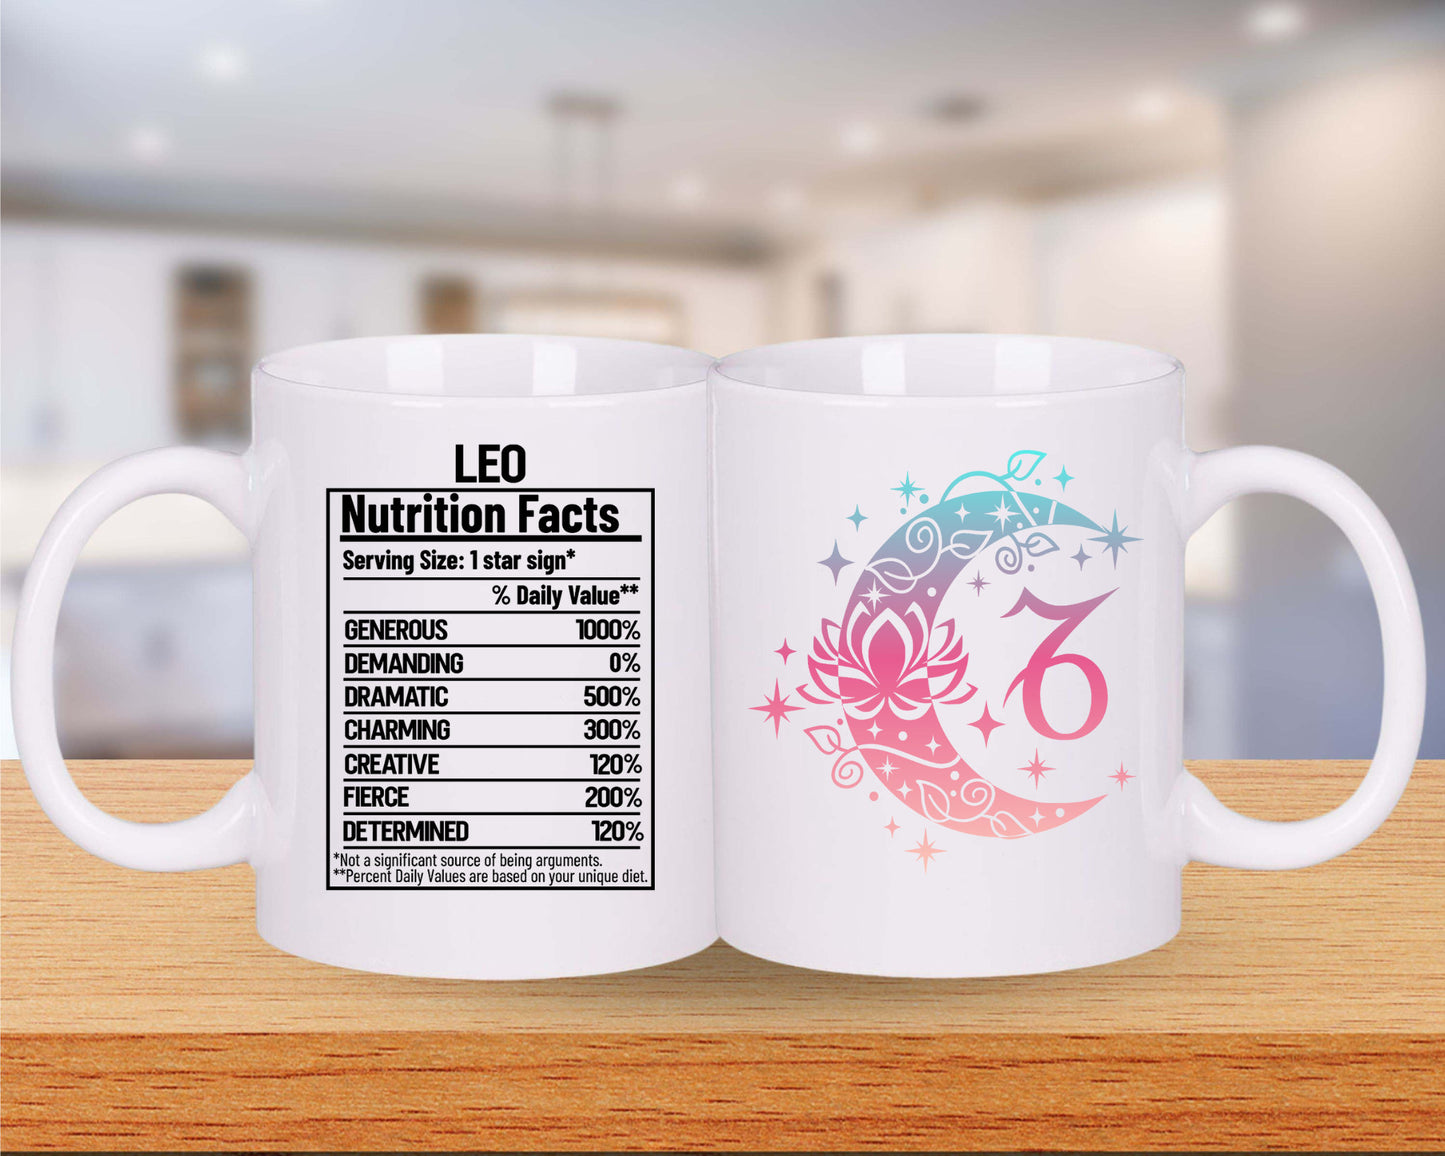 Zodiac Nutritional Facts Coffee Mug, 11oz Ceramic Cup with Astrological Insights and Stunning Zodiac Art, Horoscope Mug for Astrology Lover